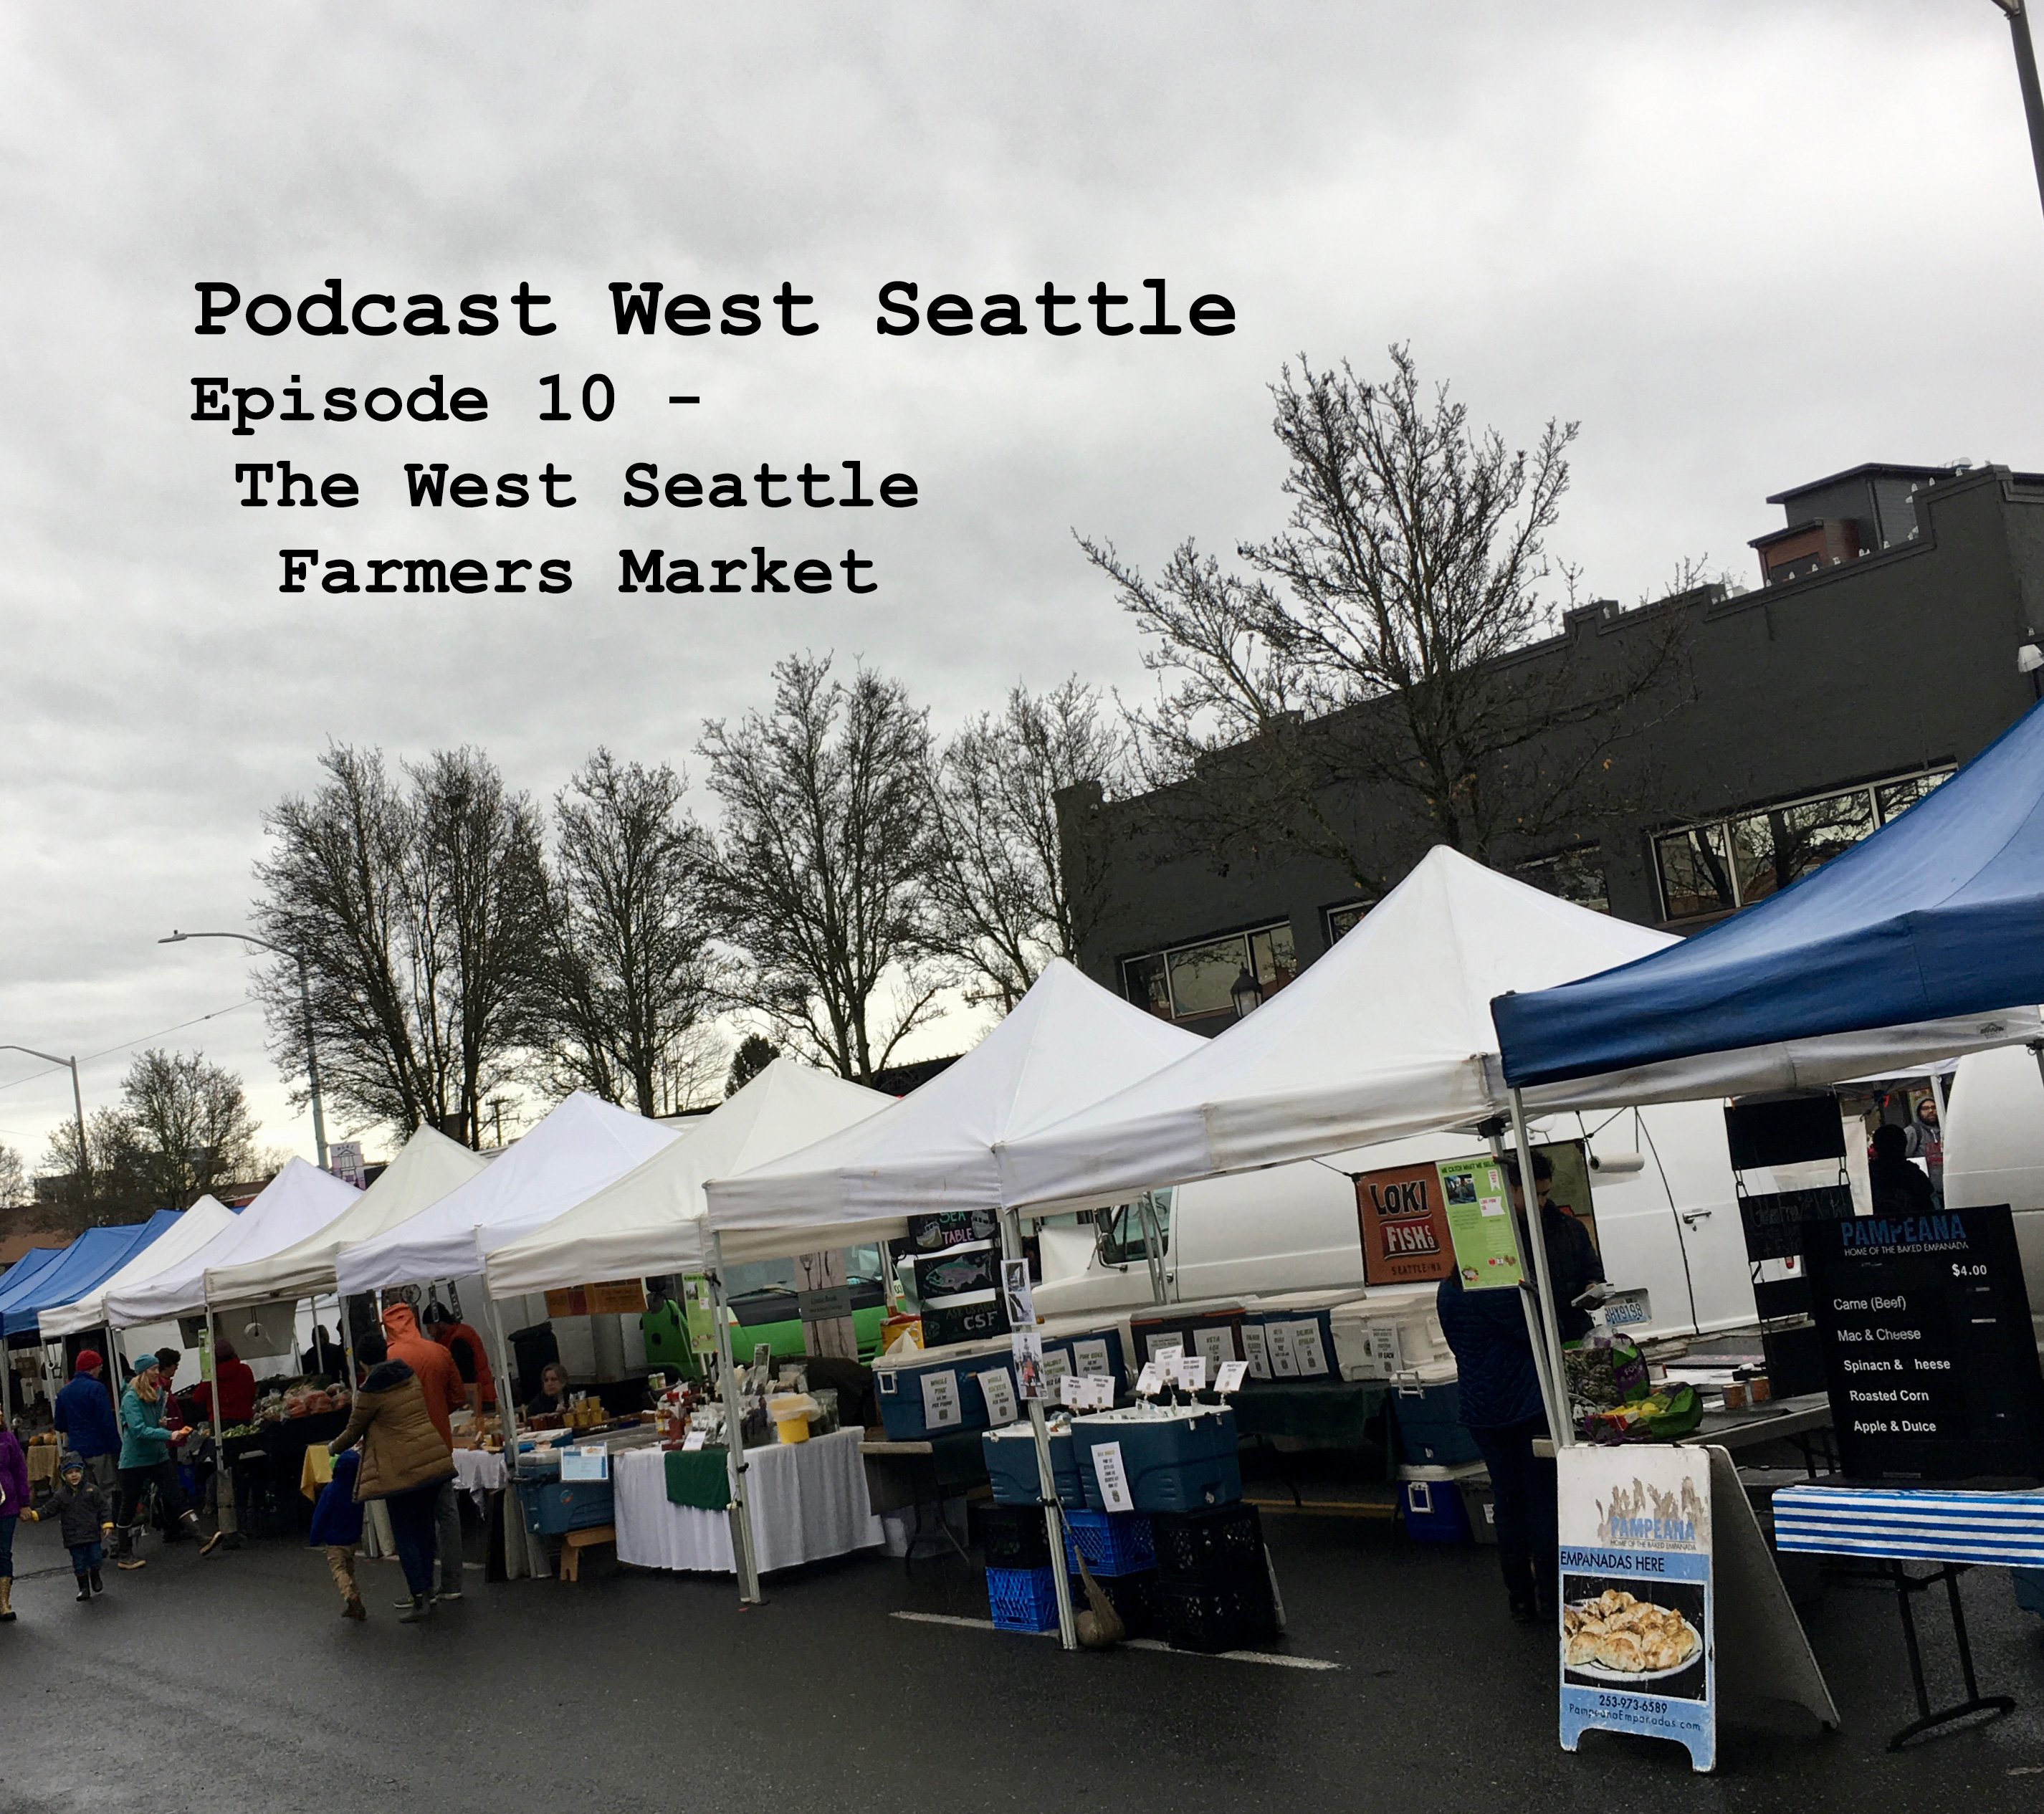 Episode 10 - Behind the Scenes of the West Seattle Farmers Market